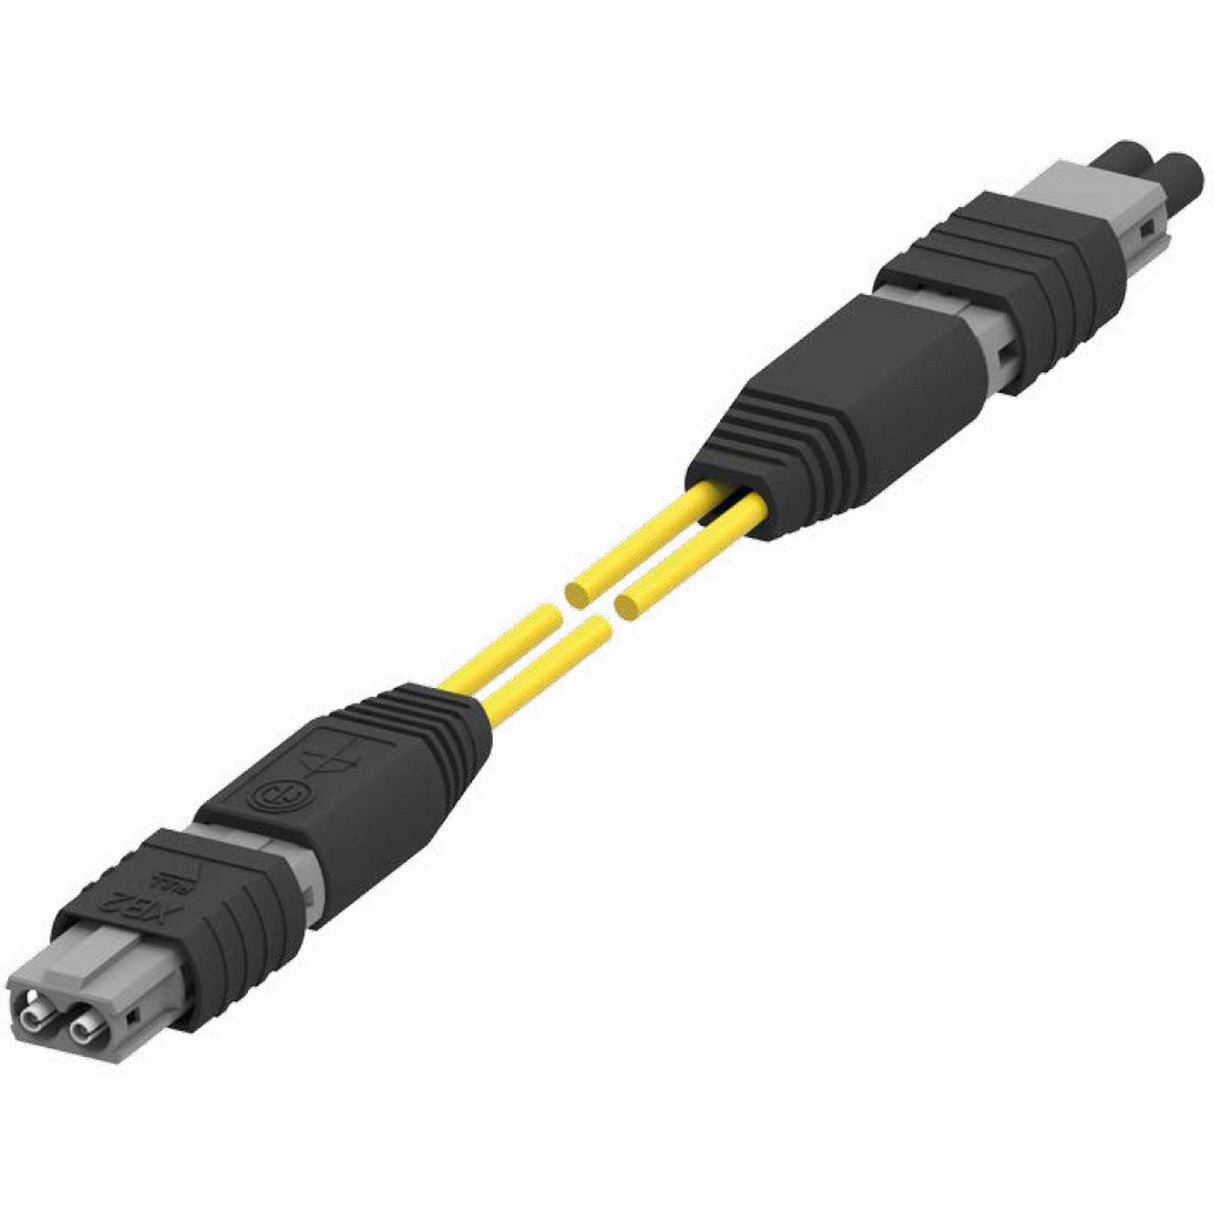 Neutrik NKOP2S-XP-0-10 opticalCON DRAGONFLY XB2 Male to XB2 Female Patch Cable, 10-Meter